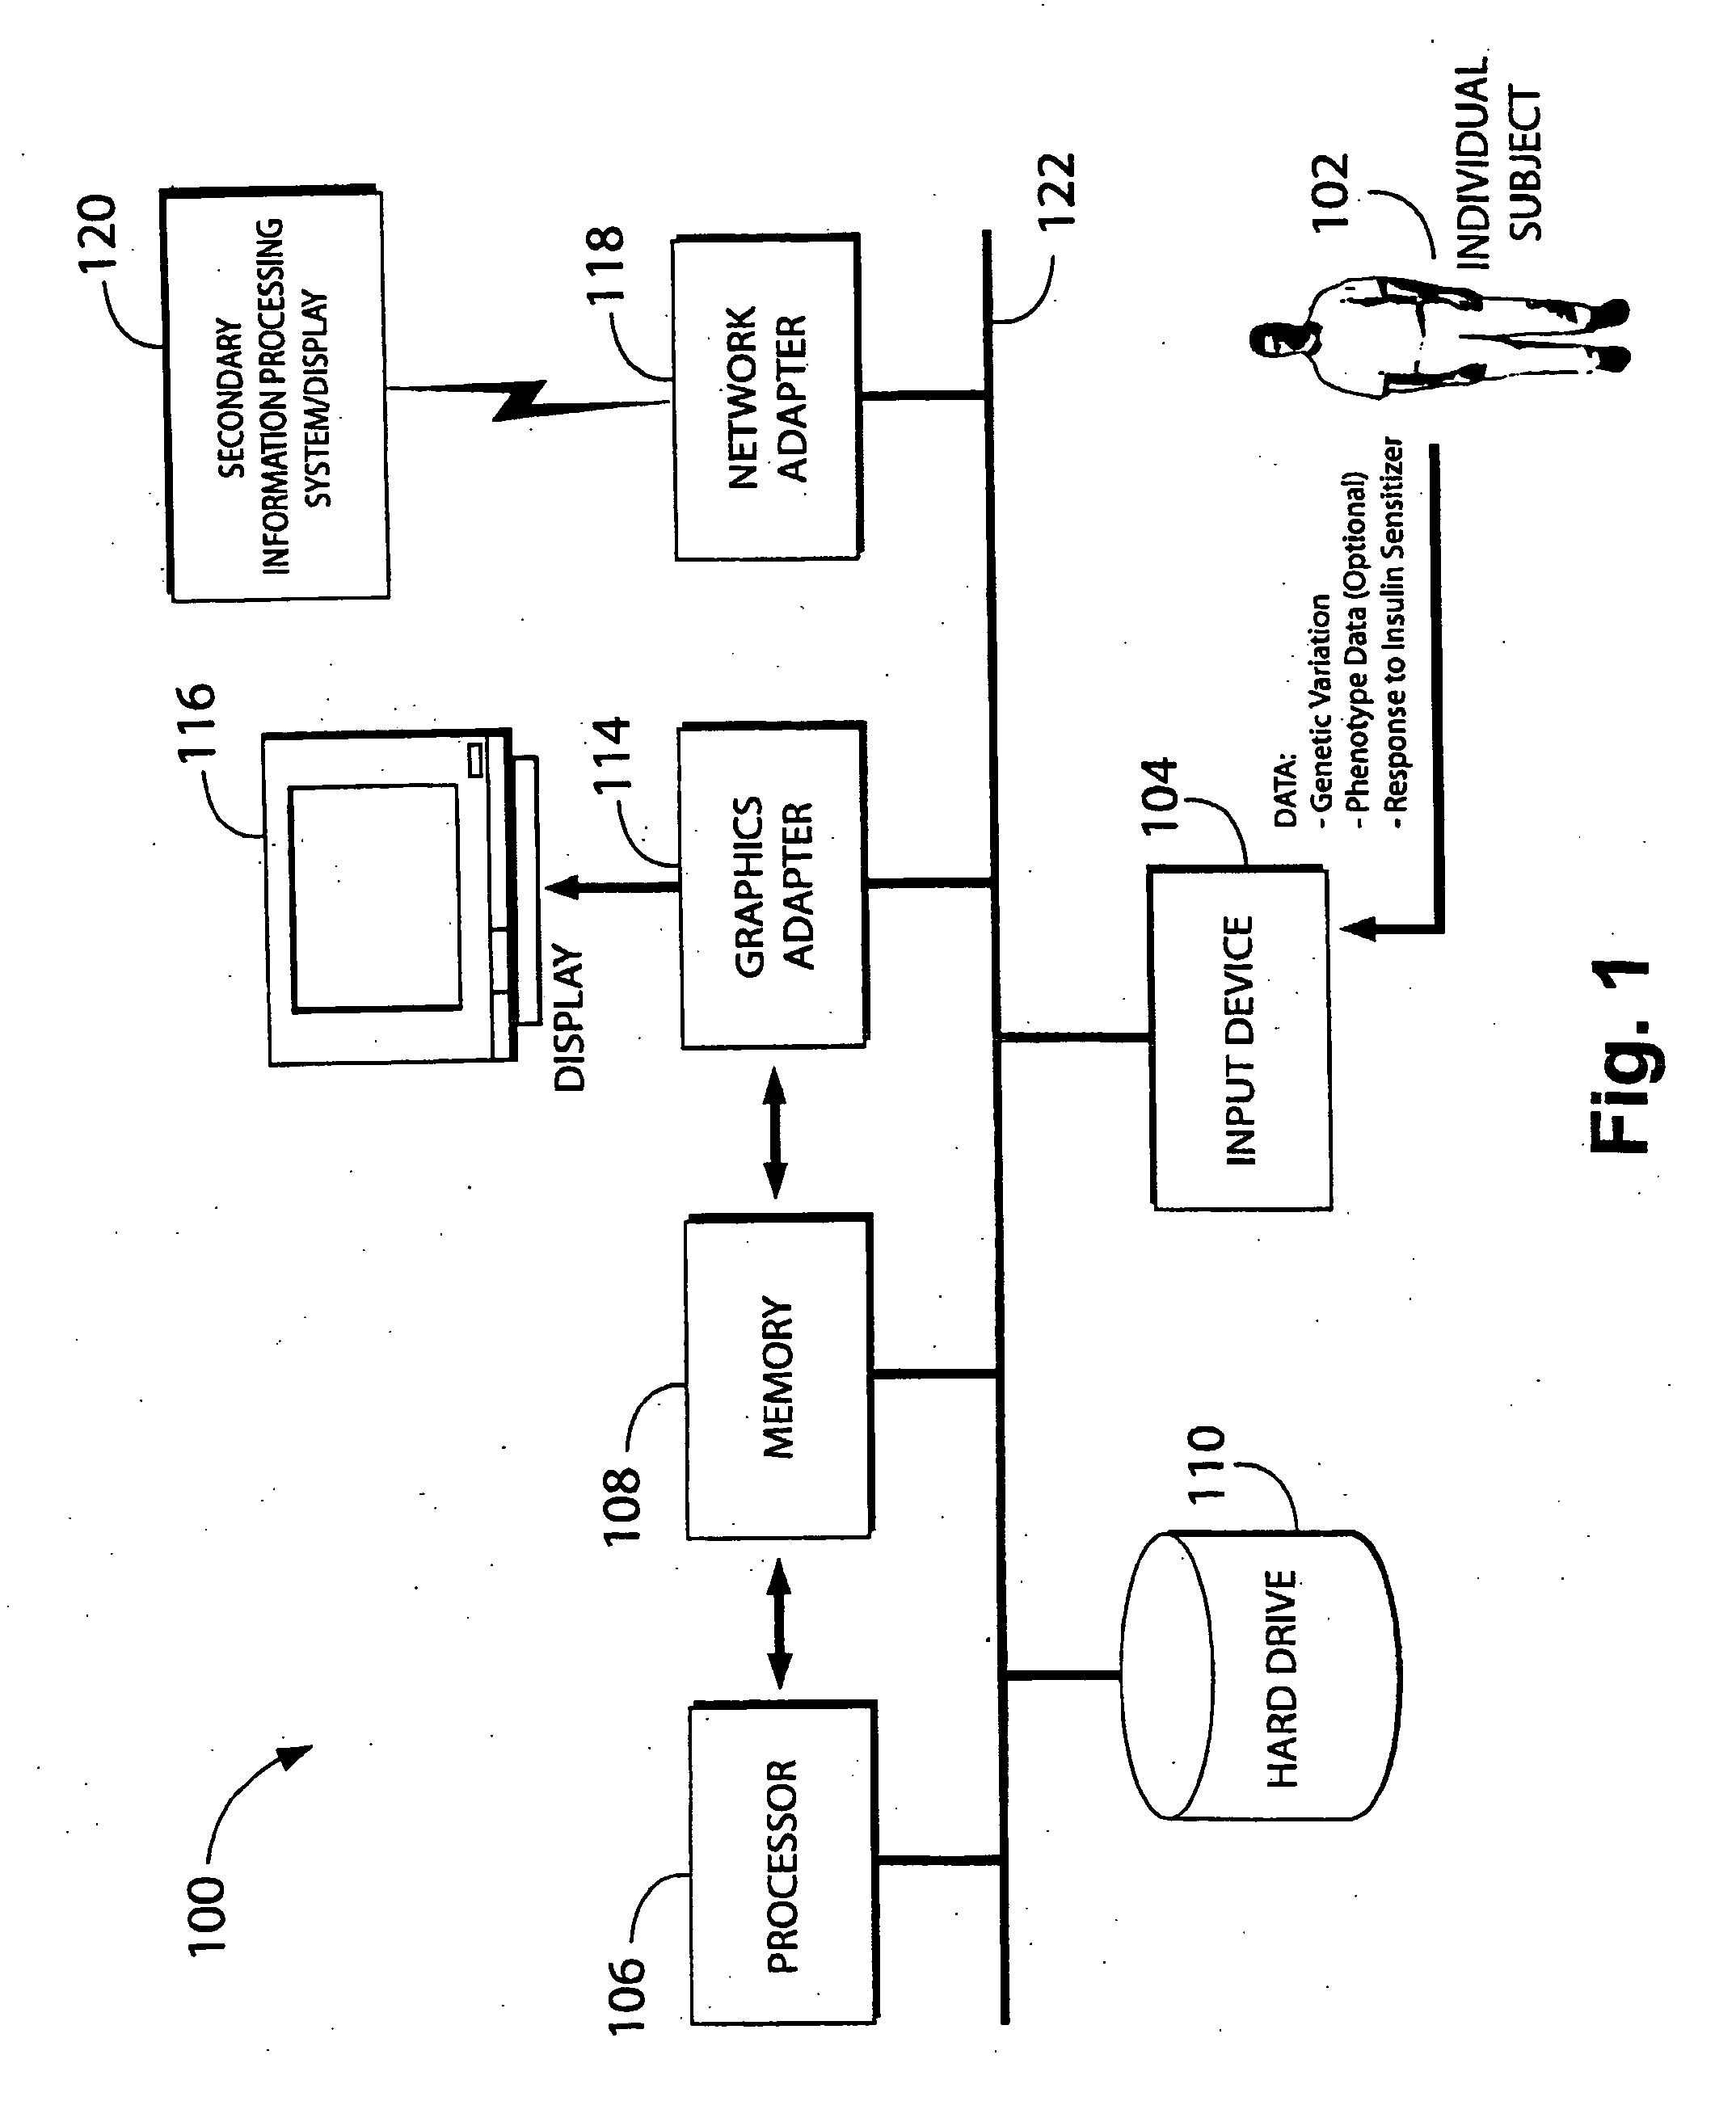 Methods and compositions for screening and treatment of disorders of blood glucose regulation